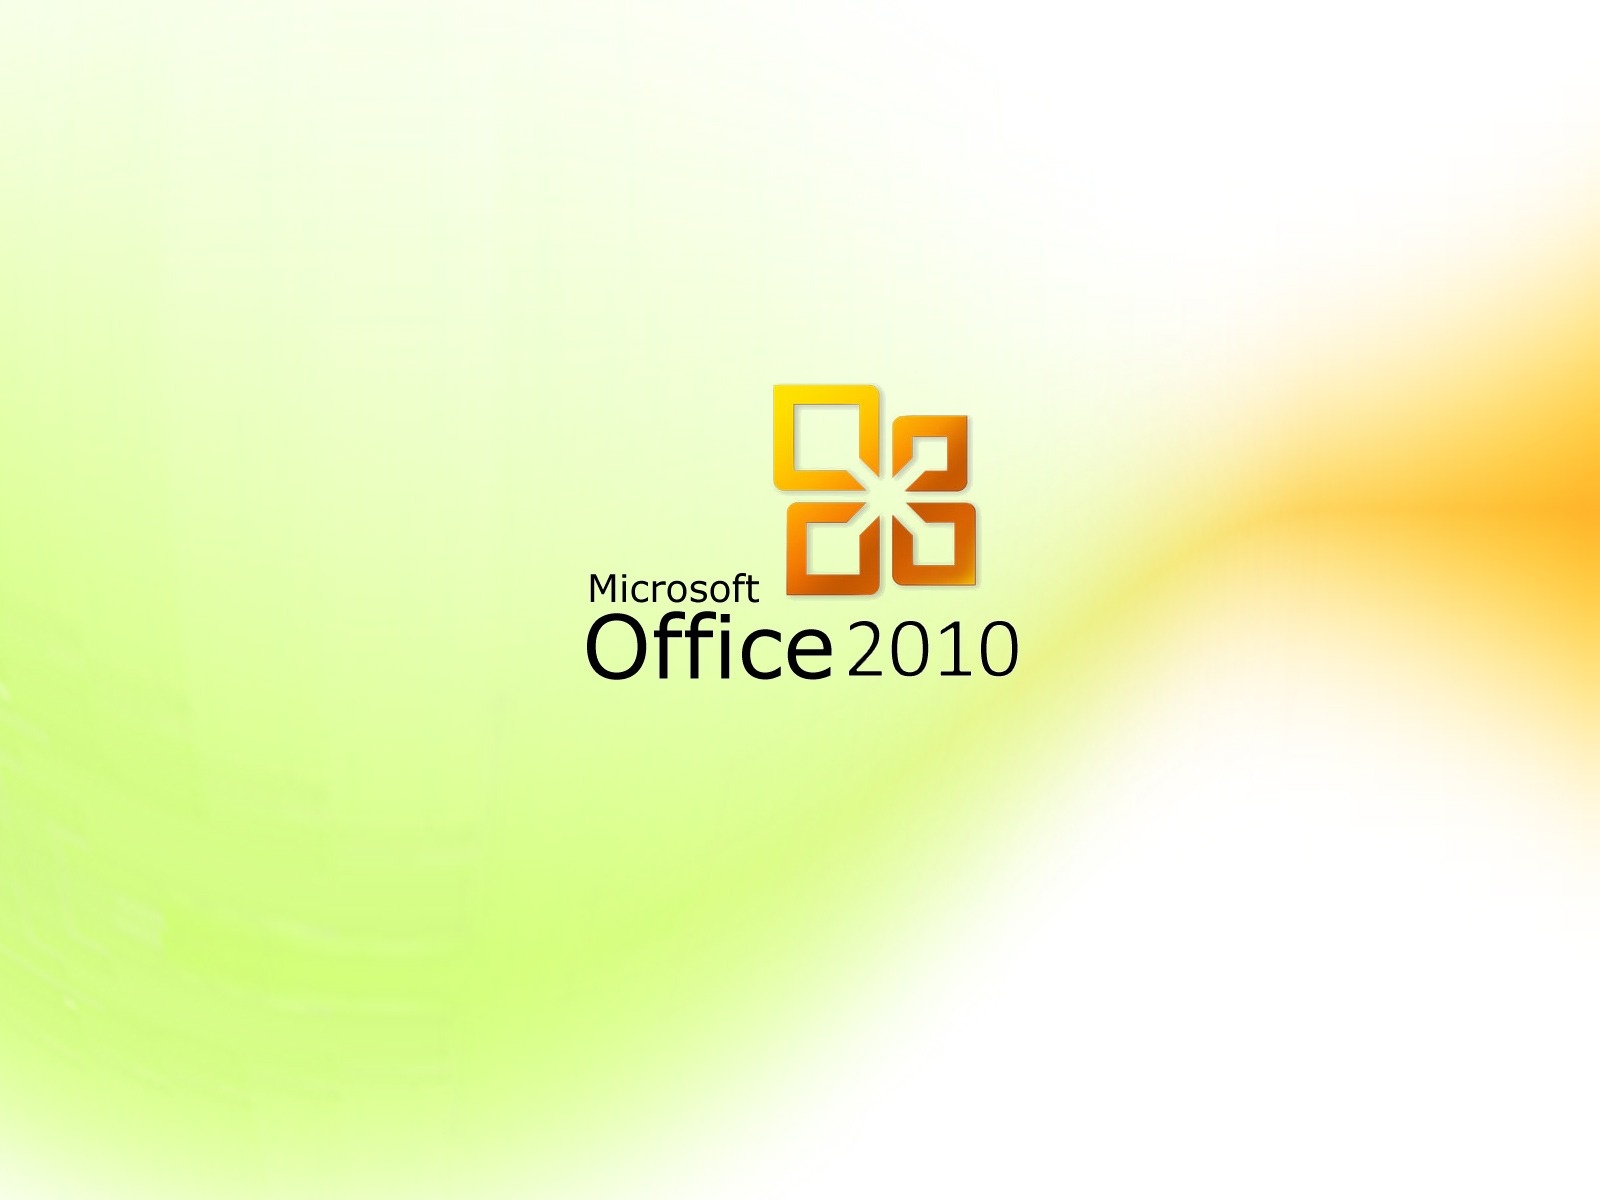 Try the Microsoft Office 2010